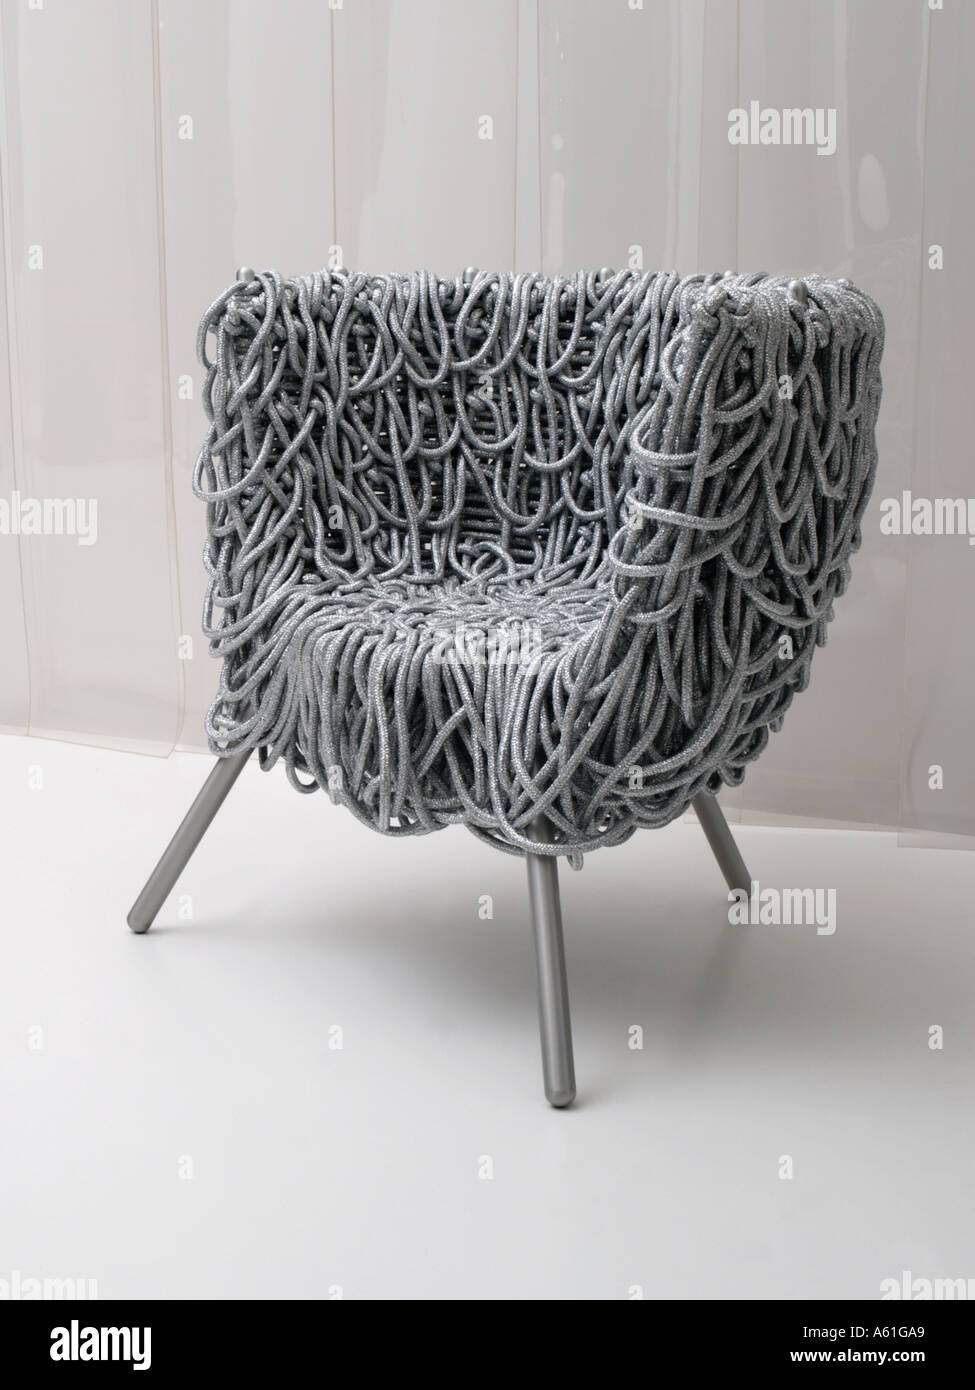 Three legged silver colored designer chair made of draped rope Stock Photo